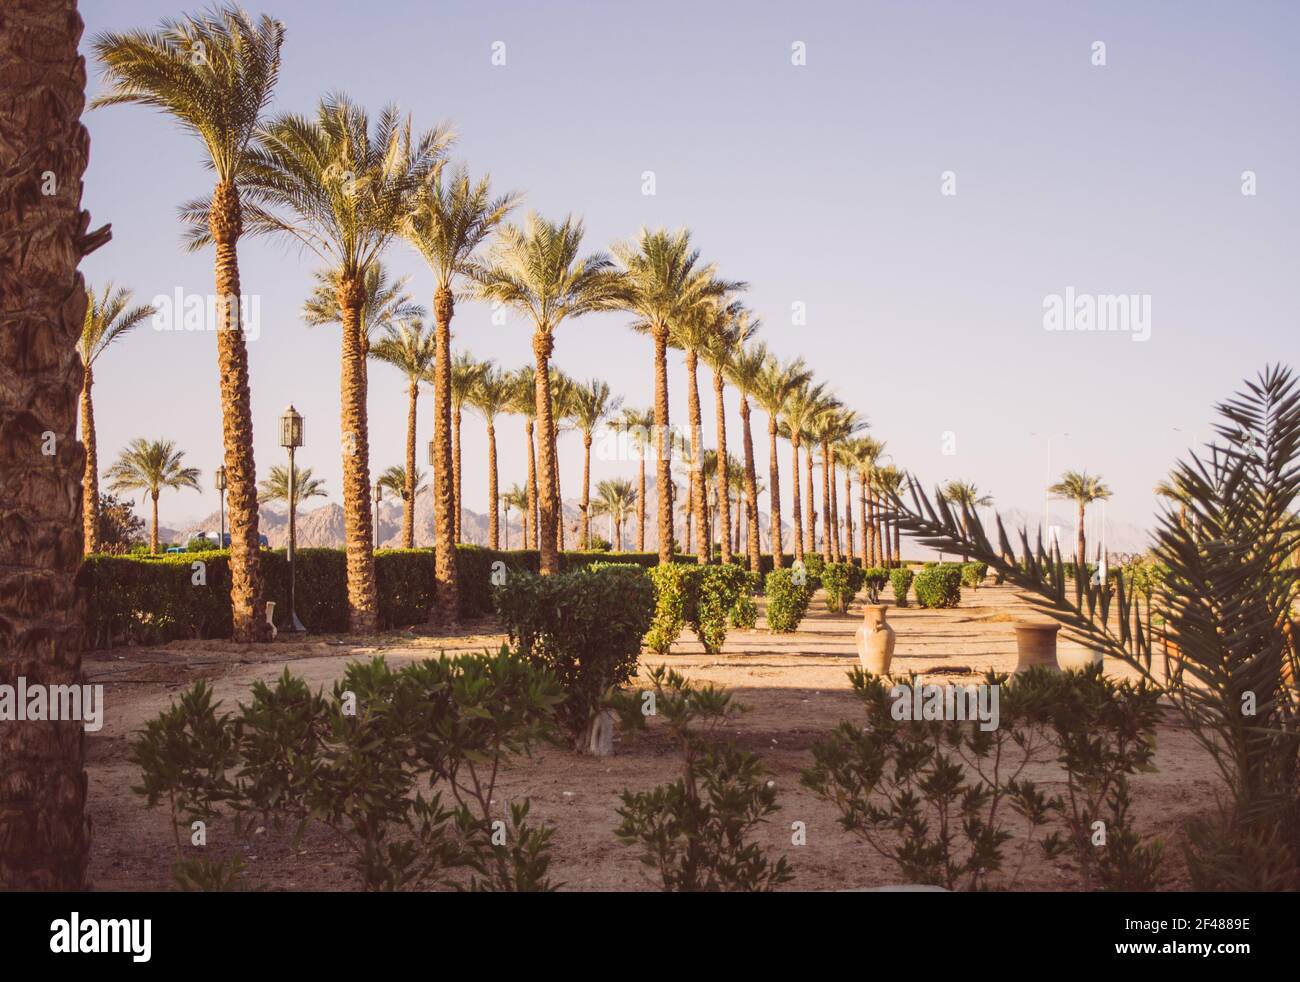 Park in Egypt with a palm tree alley in a straight line and green bushes. Clay vases are placed in the park. Sunny summer day with blue sky. Stock Photo